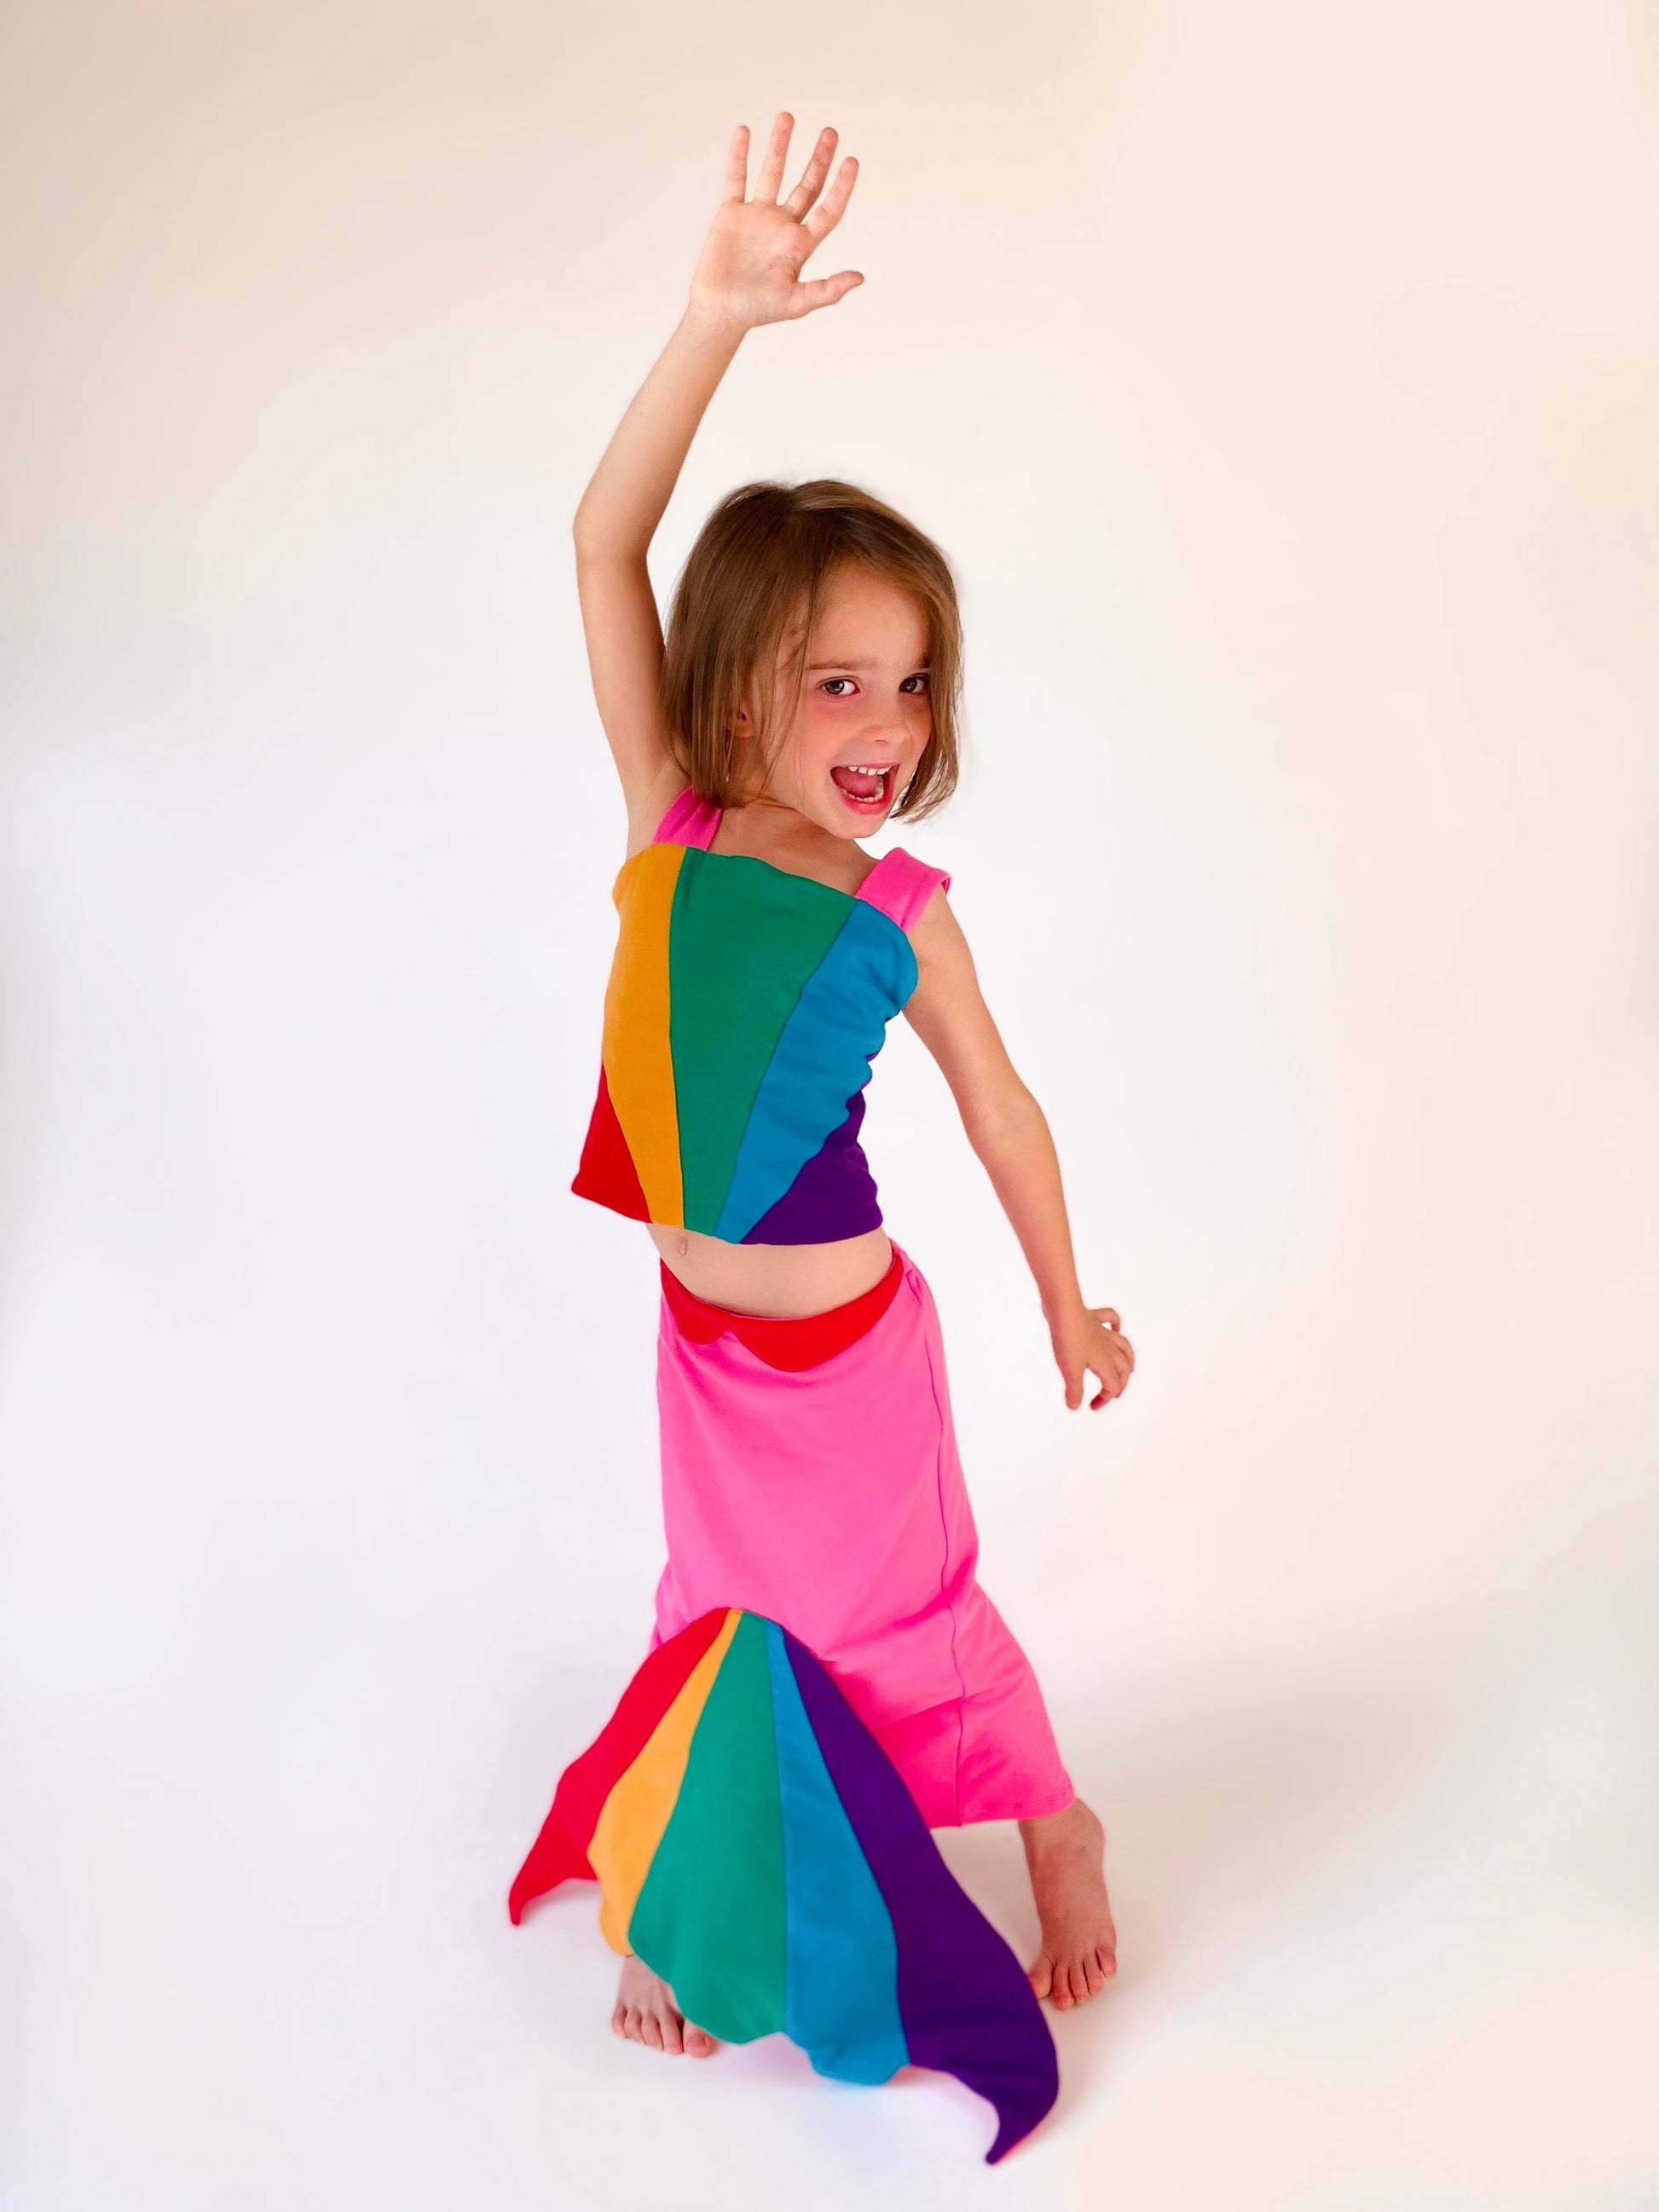 kids mermaid costume, rainbow mermaid costume, pink mermaid, cotton mermaid costume, halloween costume for kids. Rainbow mermaid costume for children, an open ended imaginative toy, made with environmentally conscious cotton in the USA. 